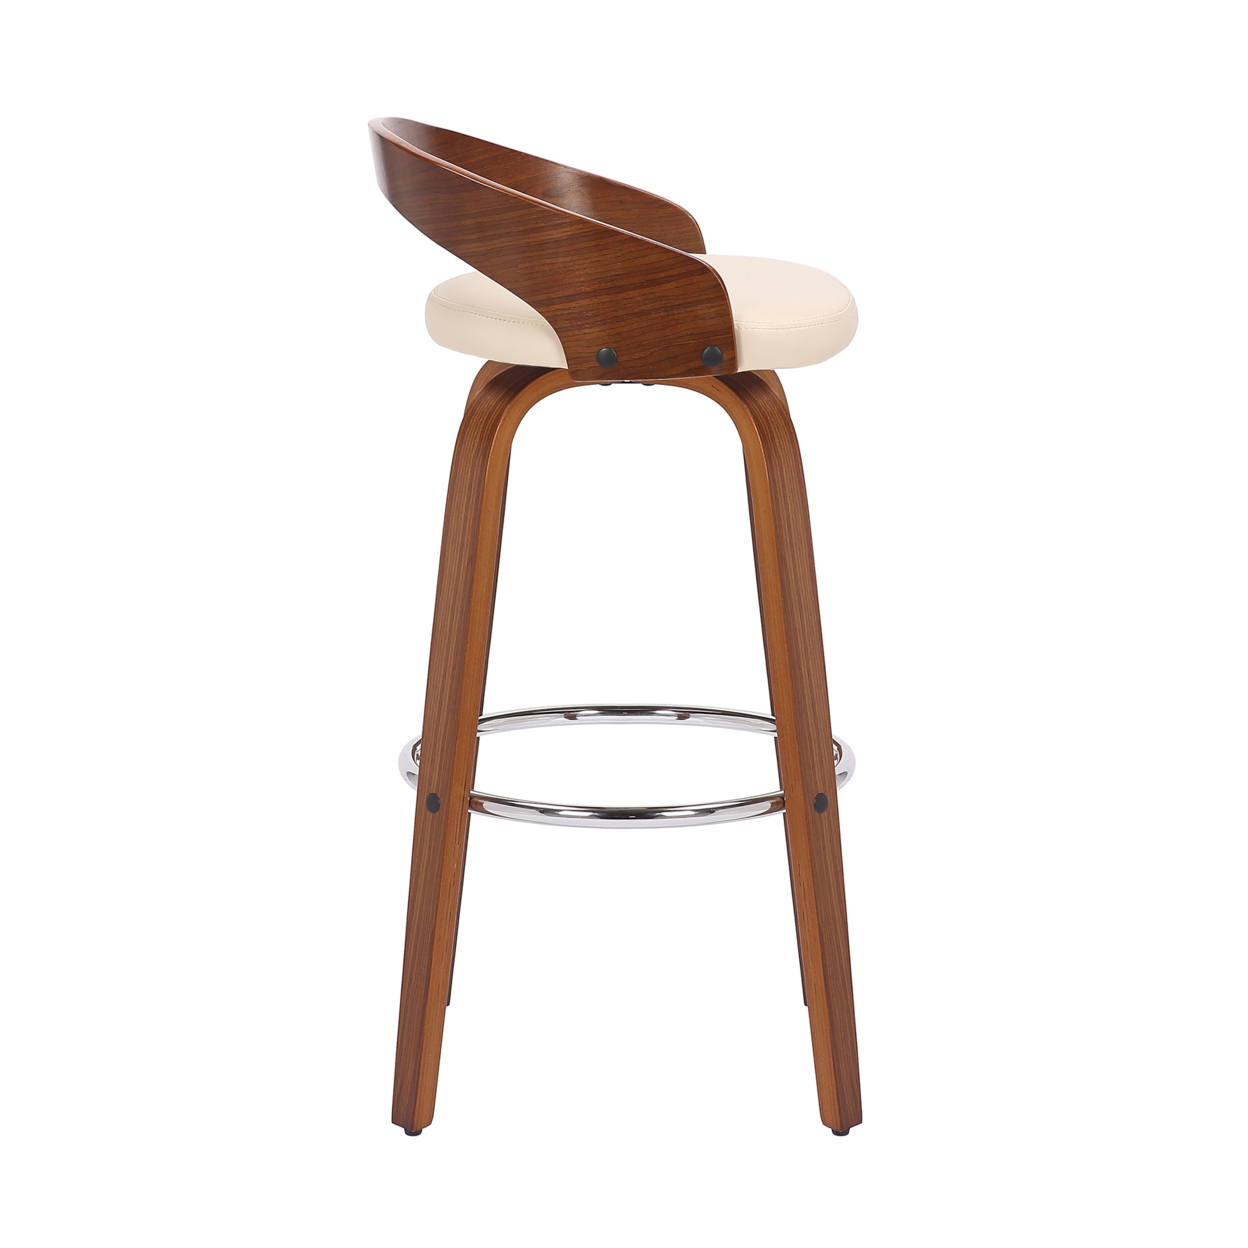 30 Inch Bar Stool With Curved Open Back And Swivel Mechanism, Brown- Saltoro Sherpi